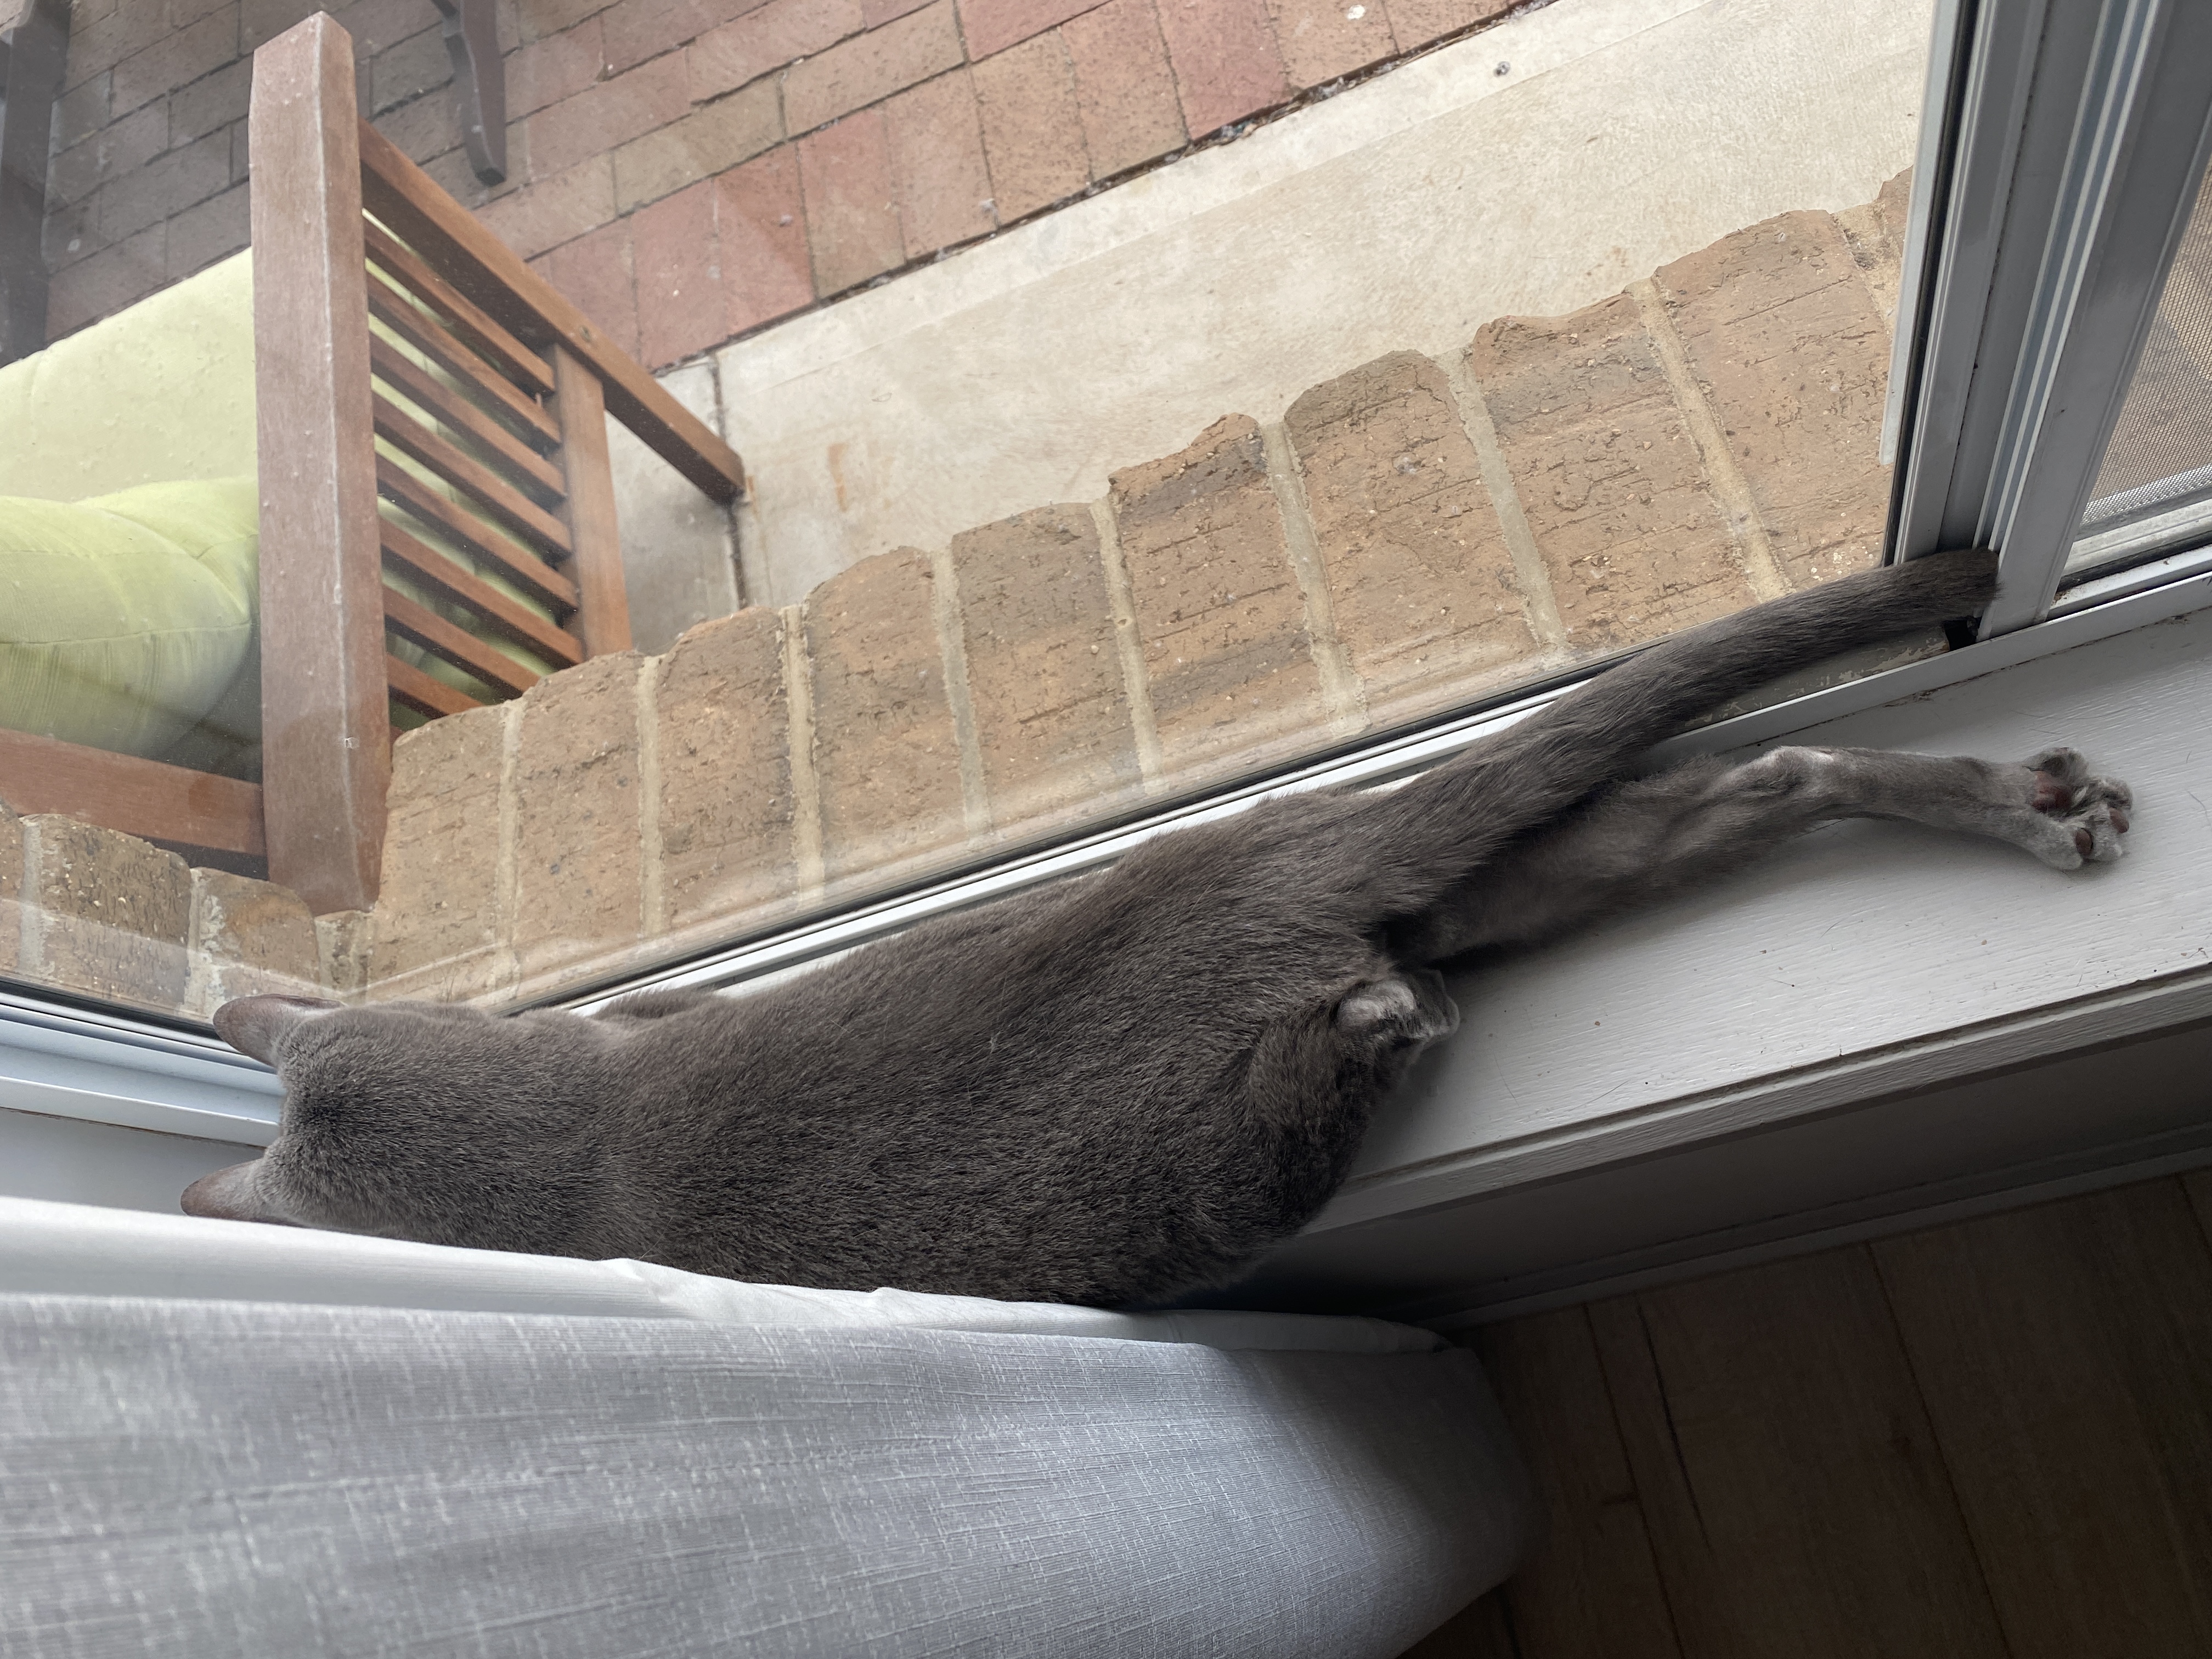 Arya lying in her favourite window, with one of her back legs inexplicably sticking straight out behind her